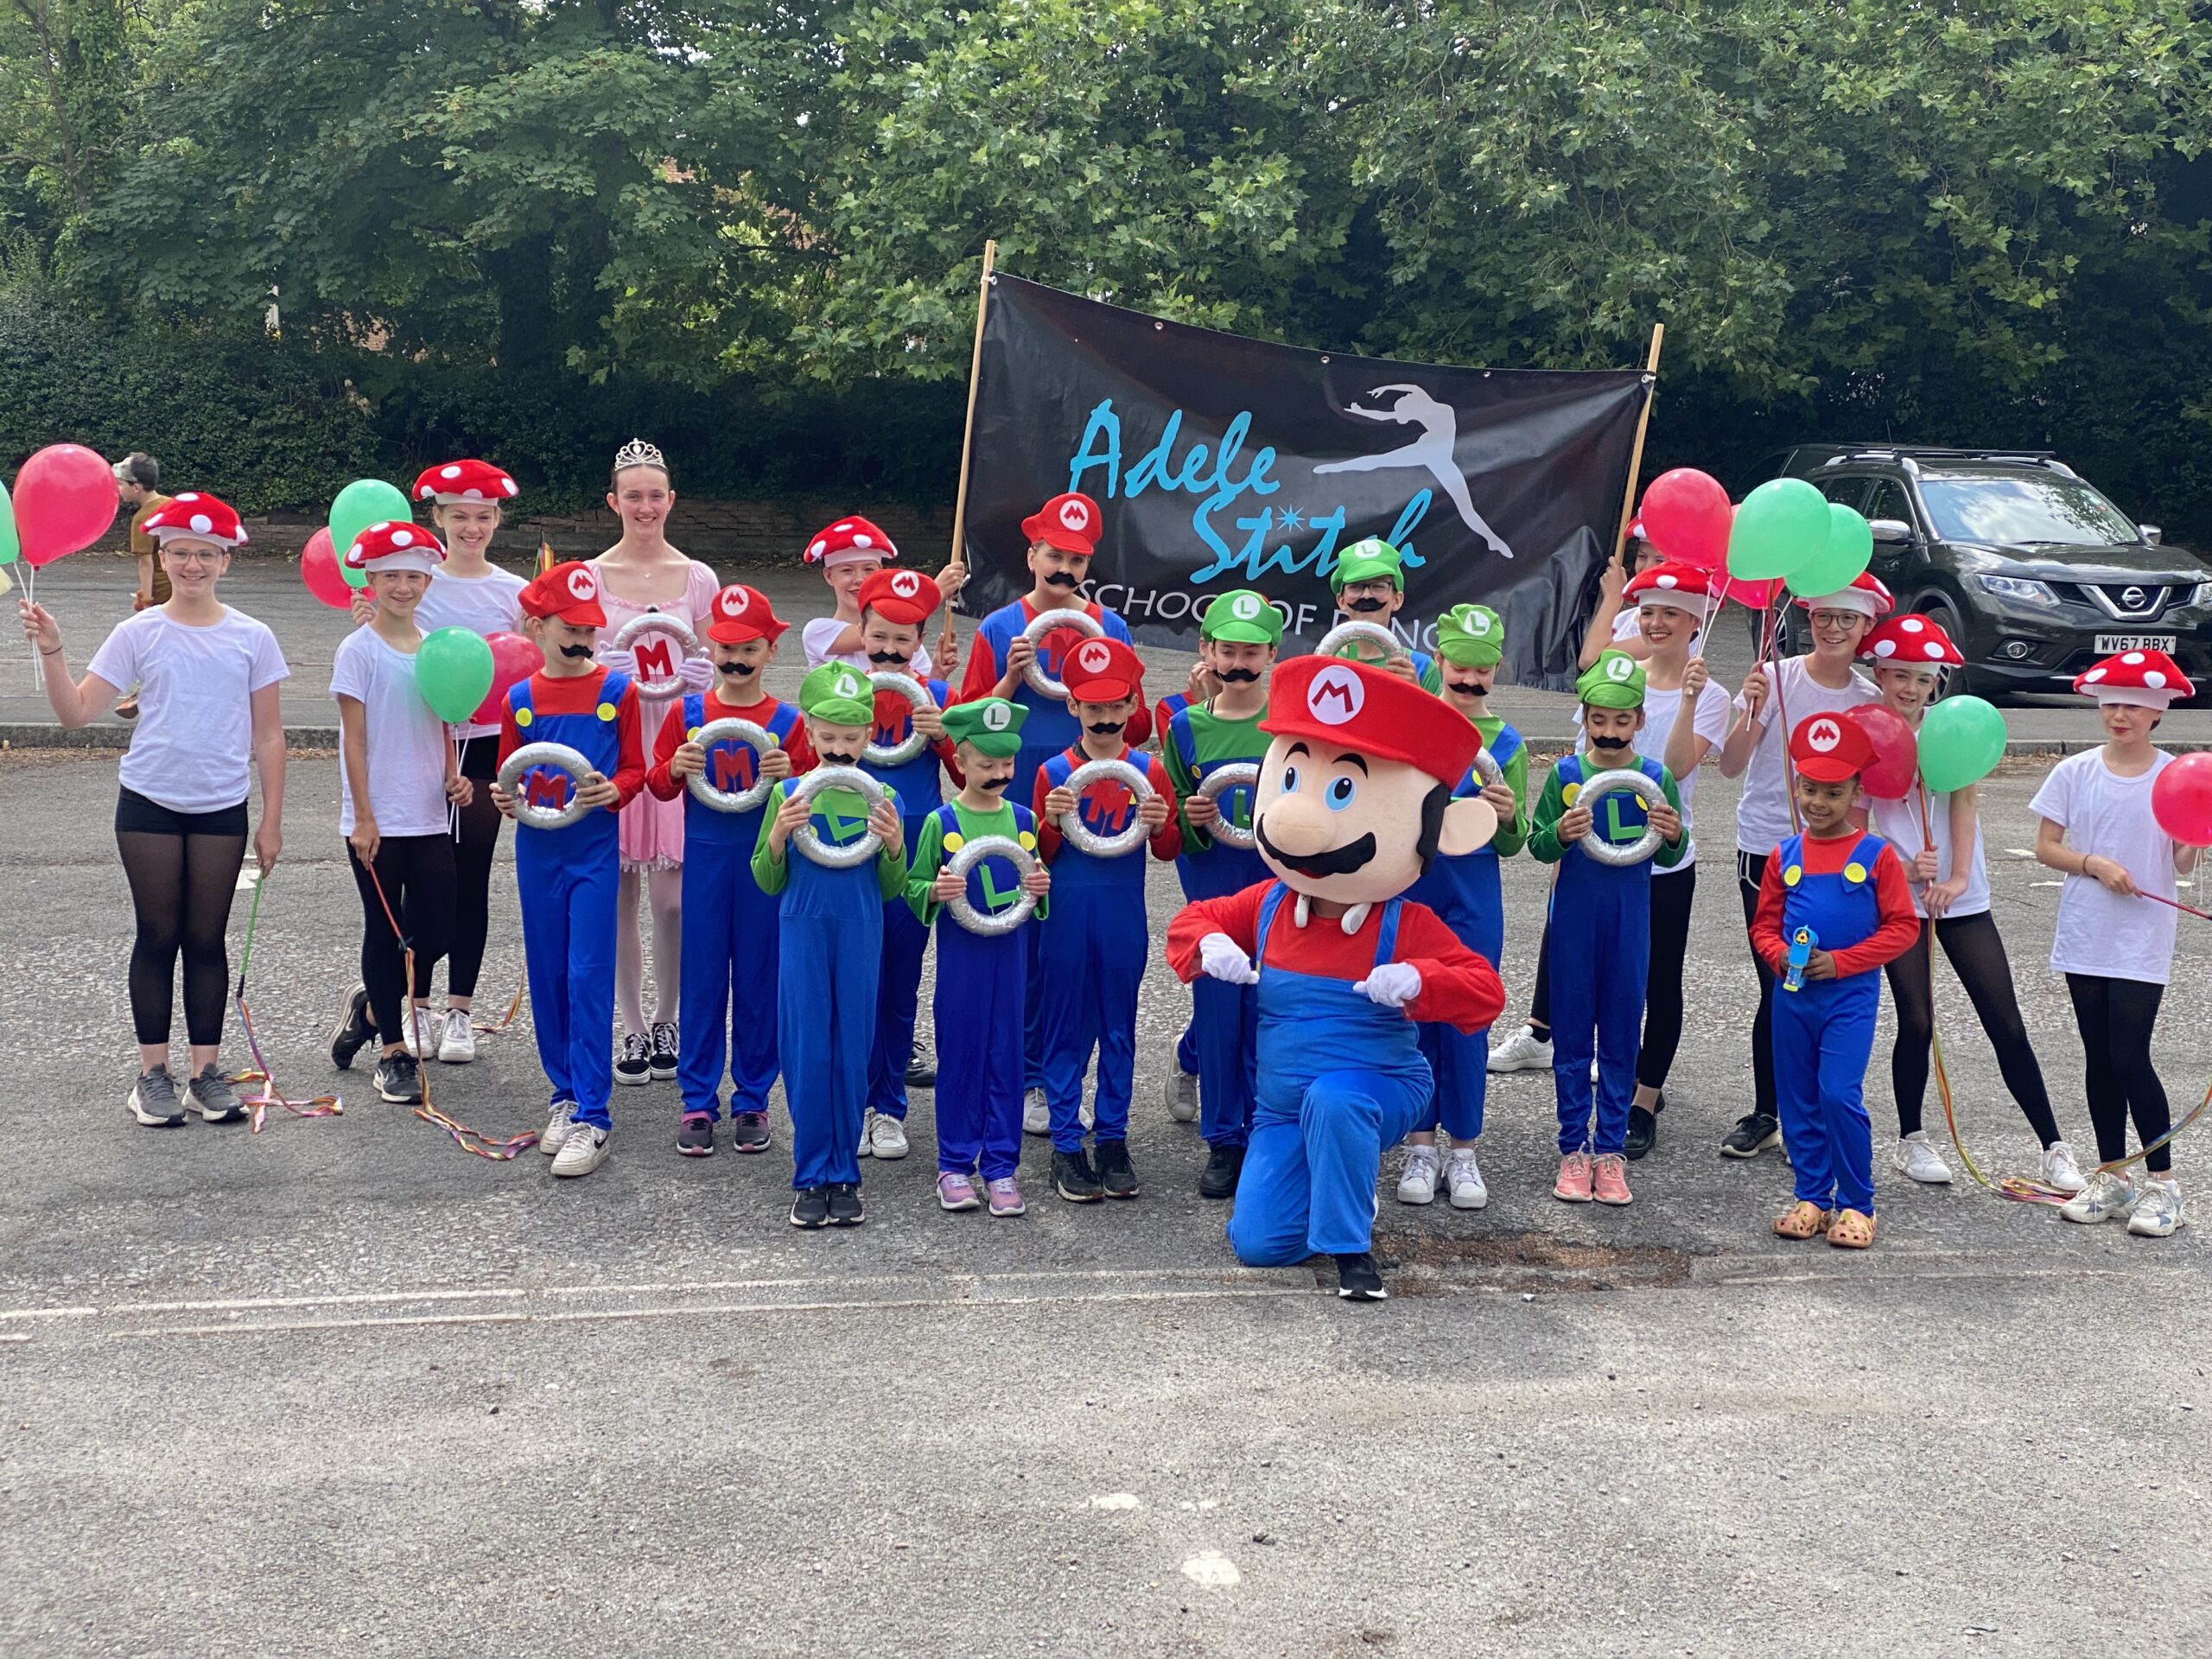 adele school of dance dressed up as mario characters